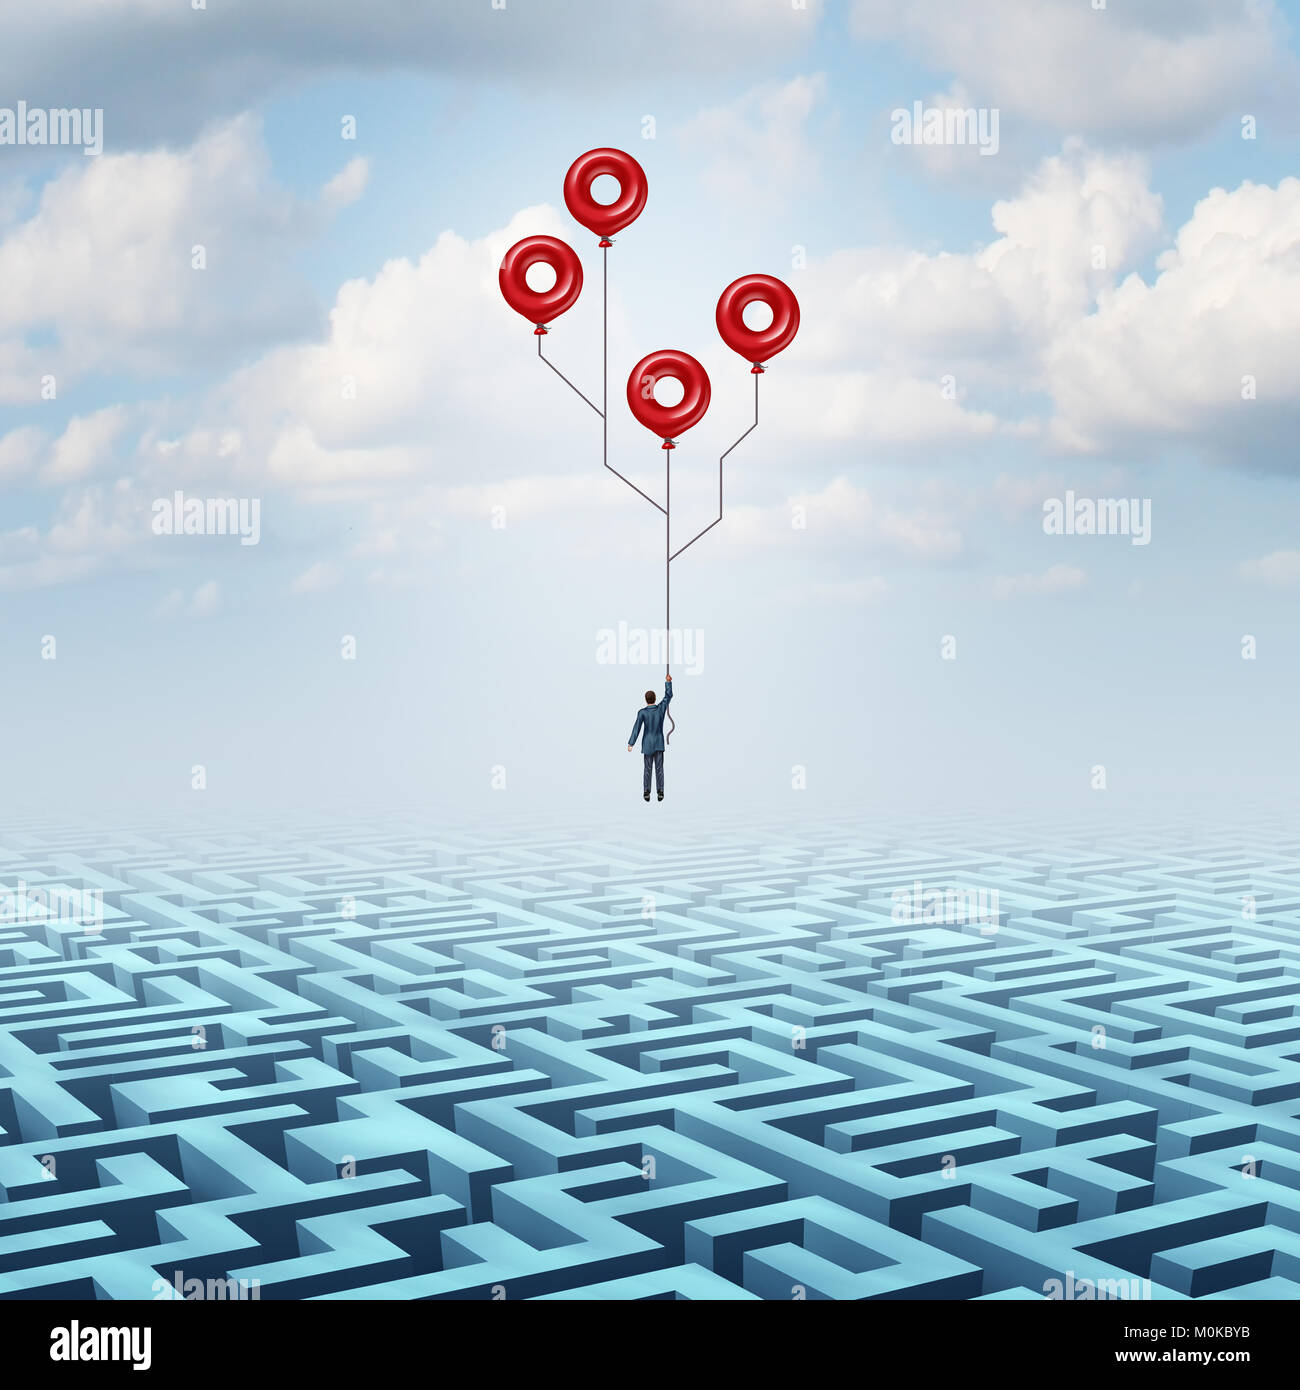 Technology Solution and high tech innovation business metaphor as a businessman holding balloons over a maze shaped as a computer circuit. Stock Photo